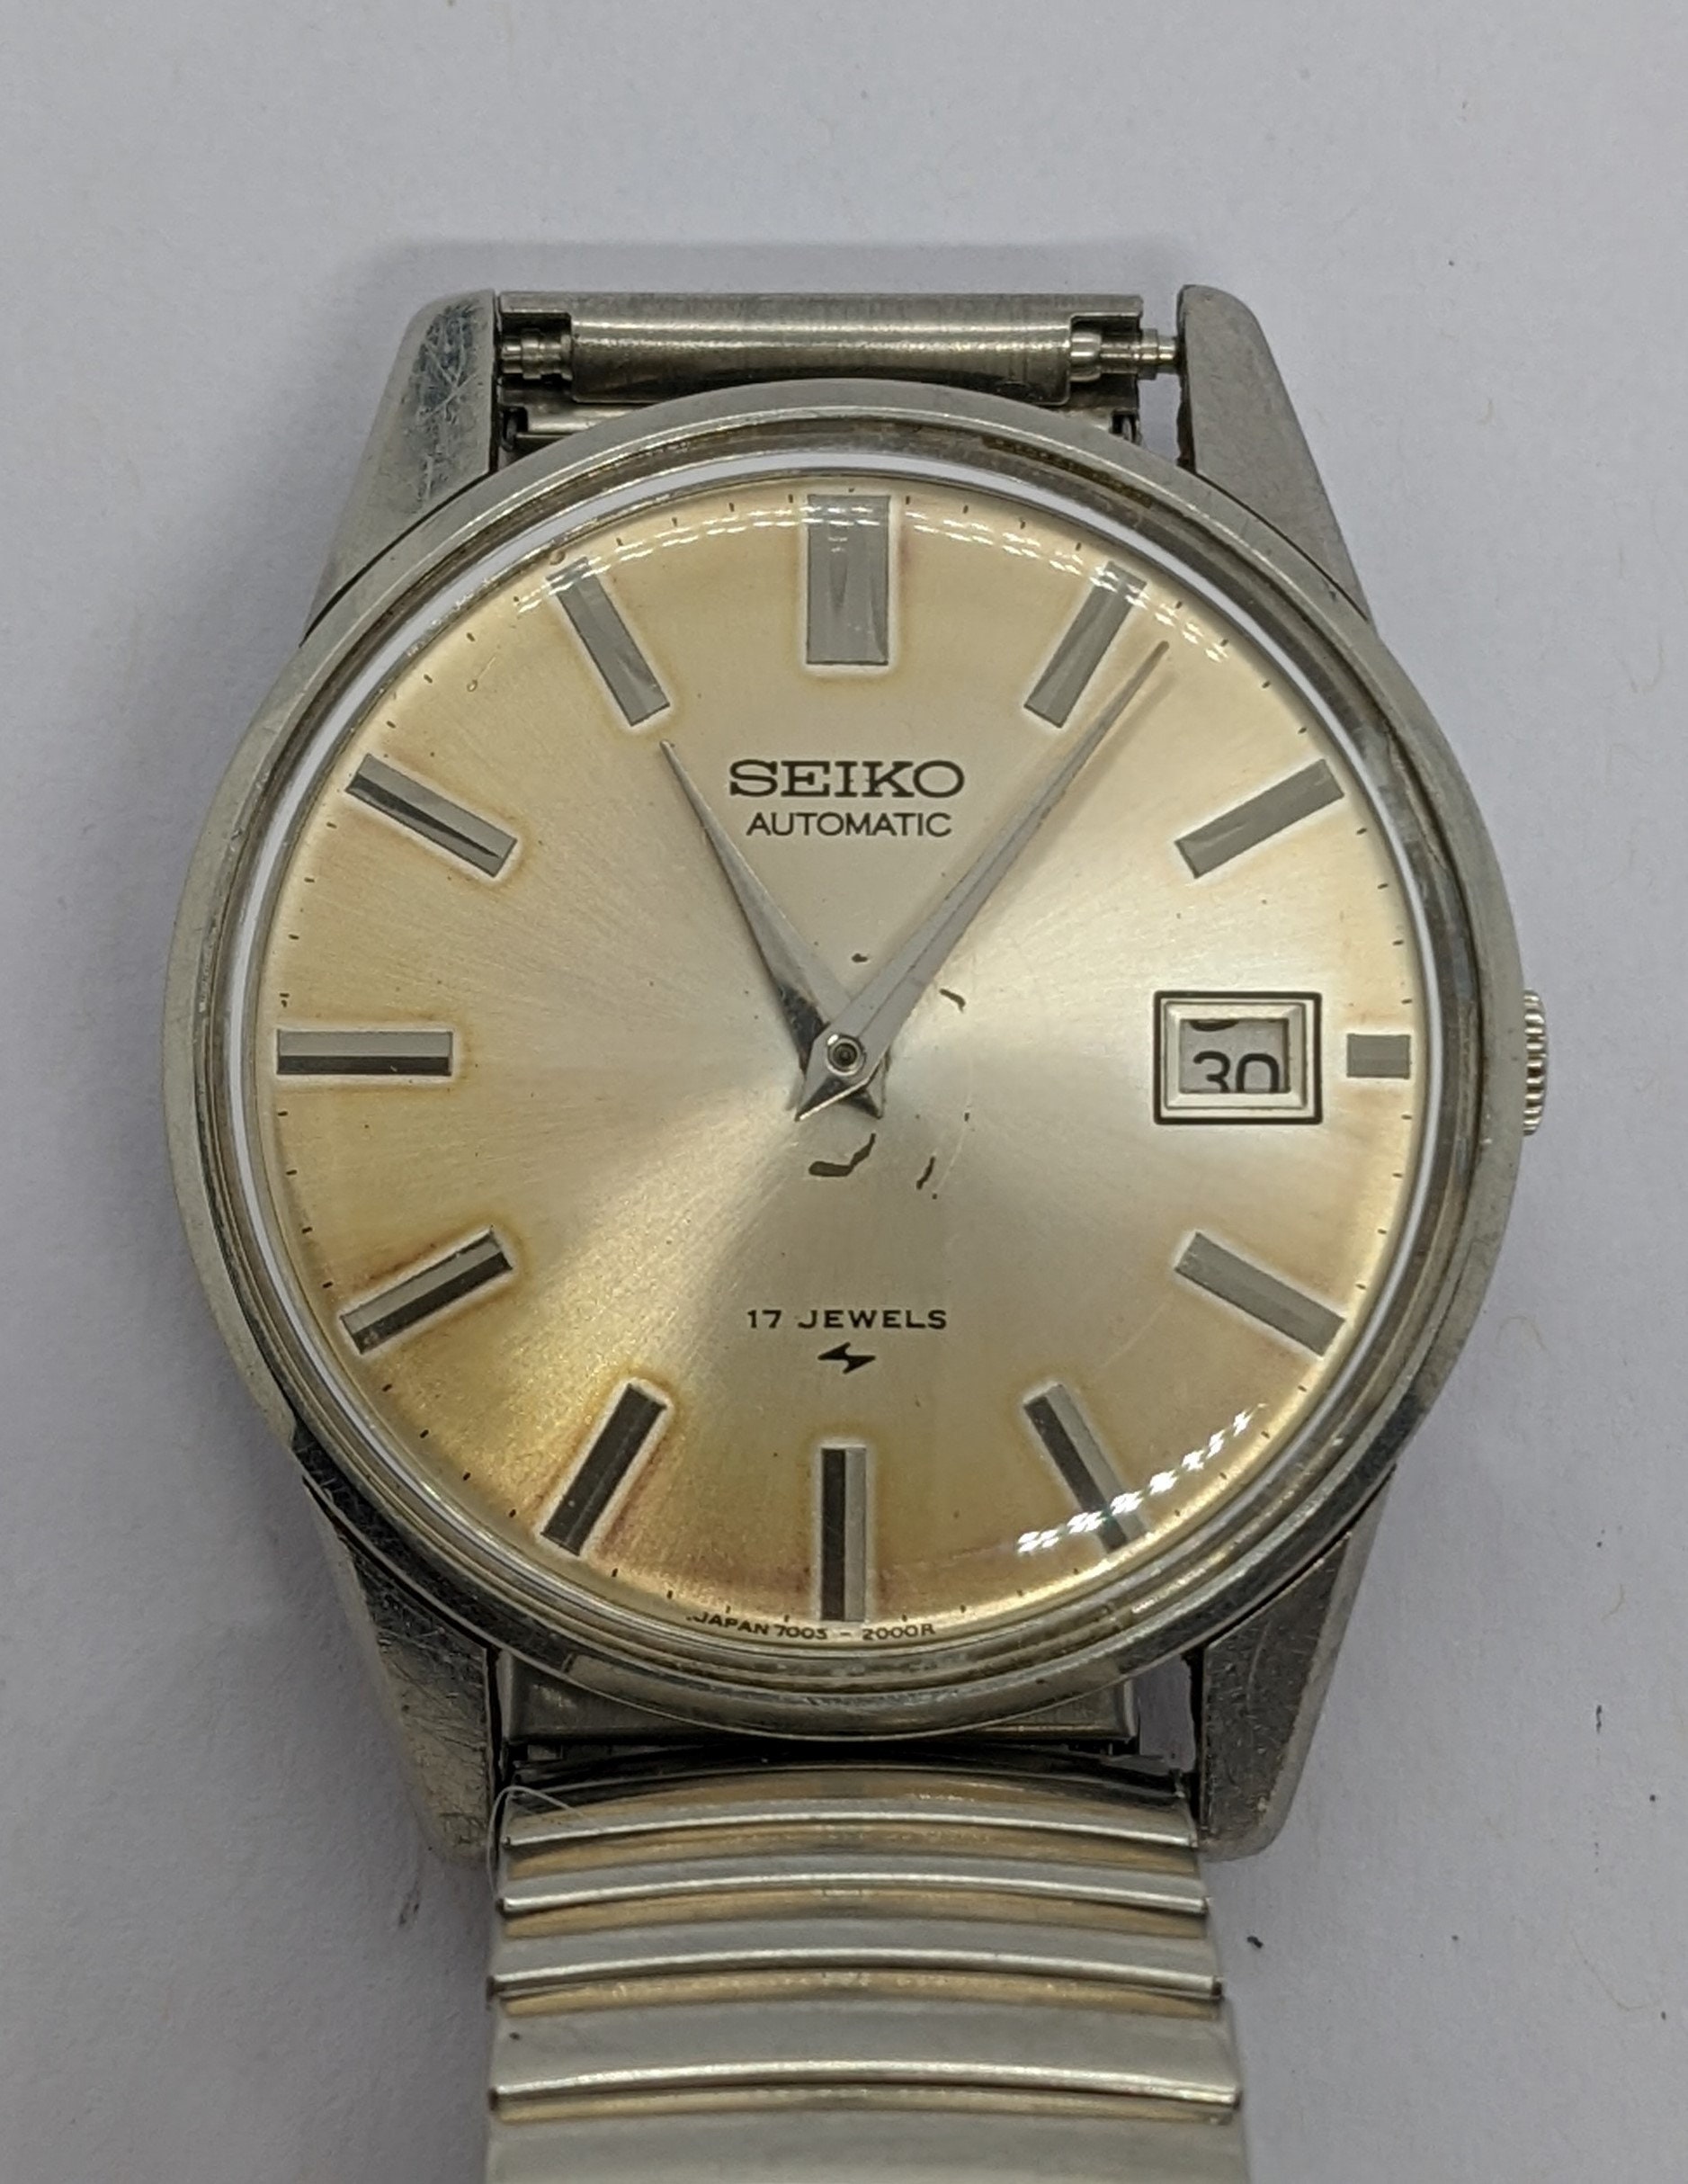 Vintage SEIKO AUTOMATIC Watch 17 1970's Etsy